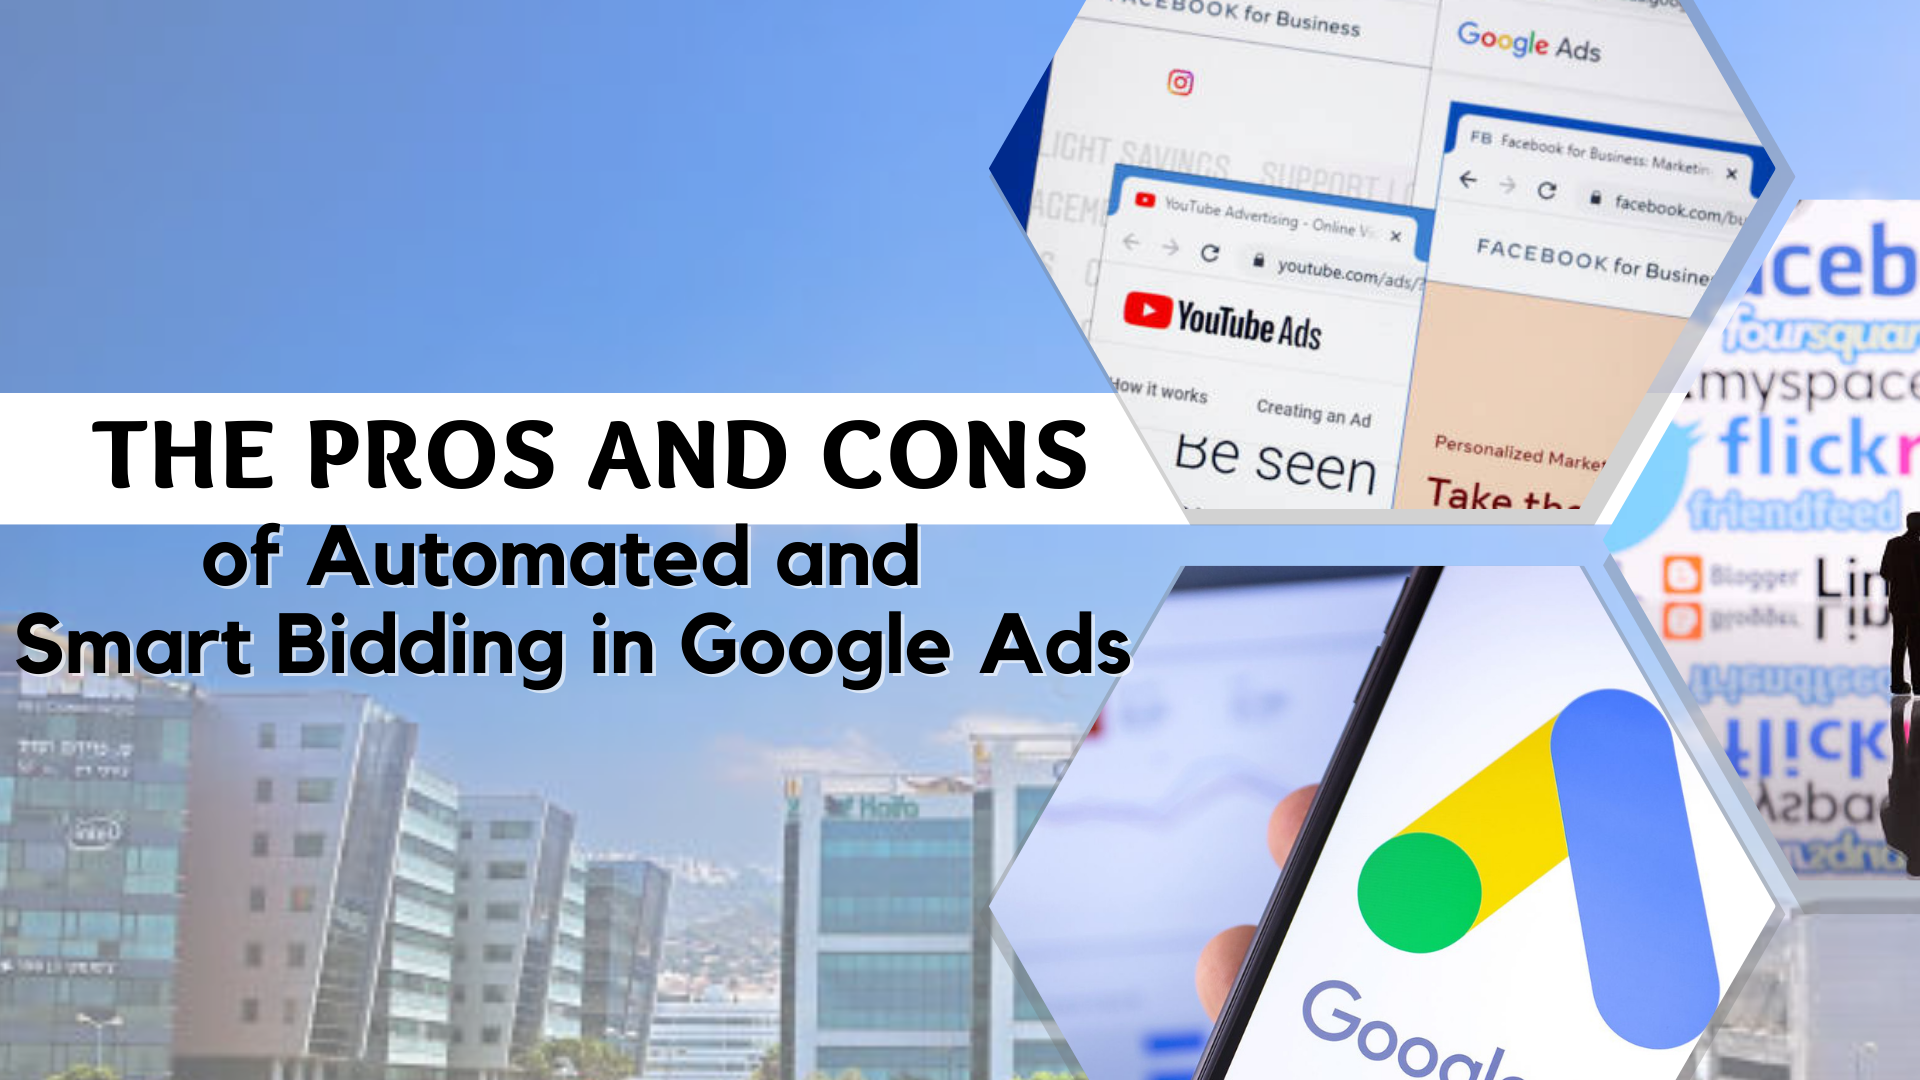 Automated & Smart Bidding in Google Ads